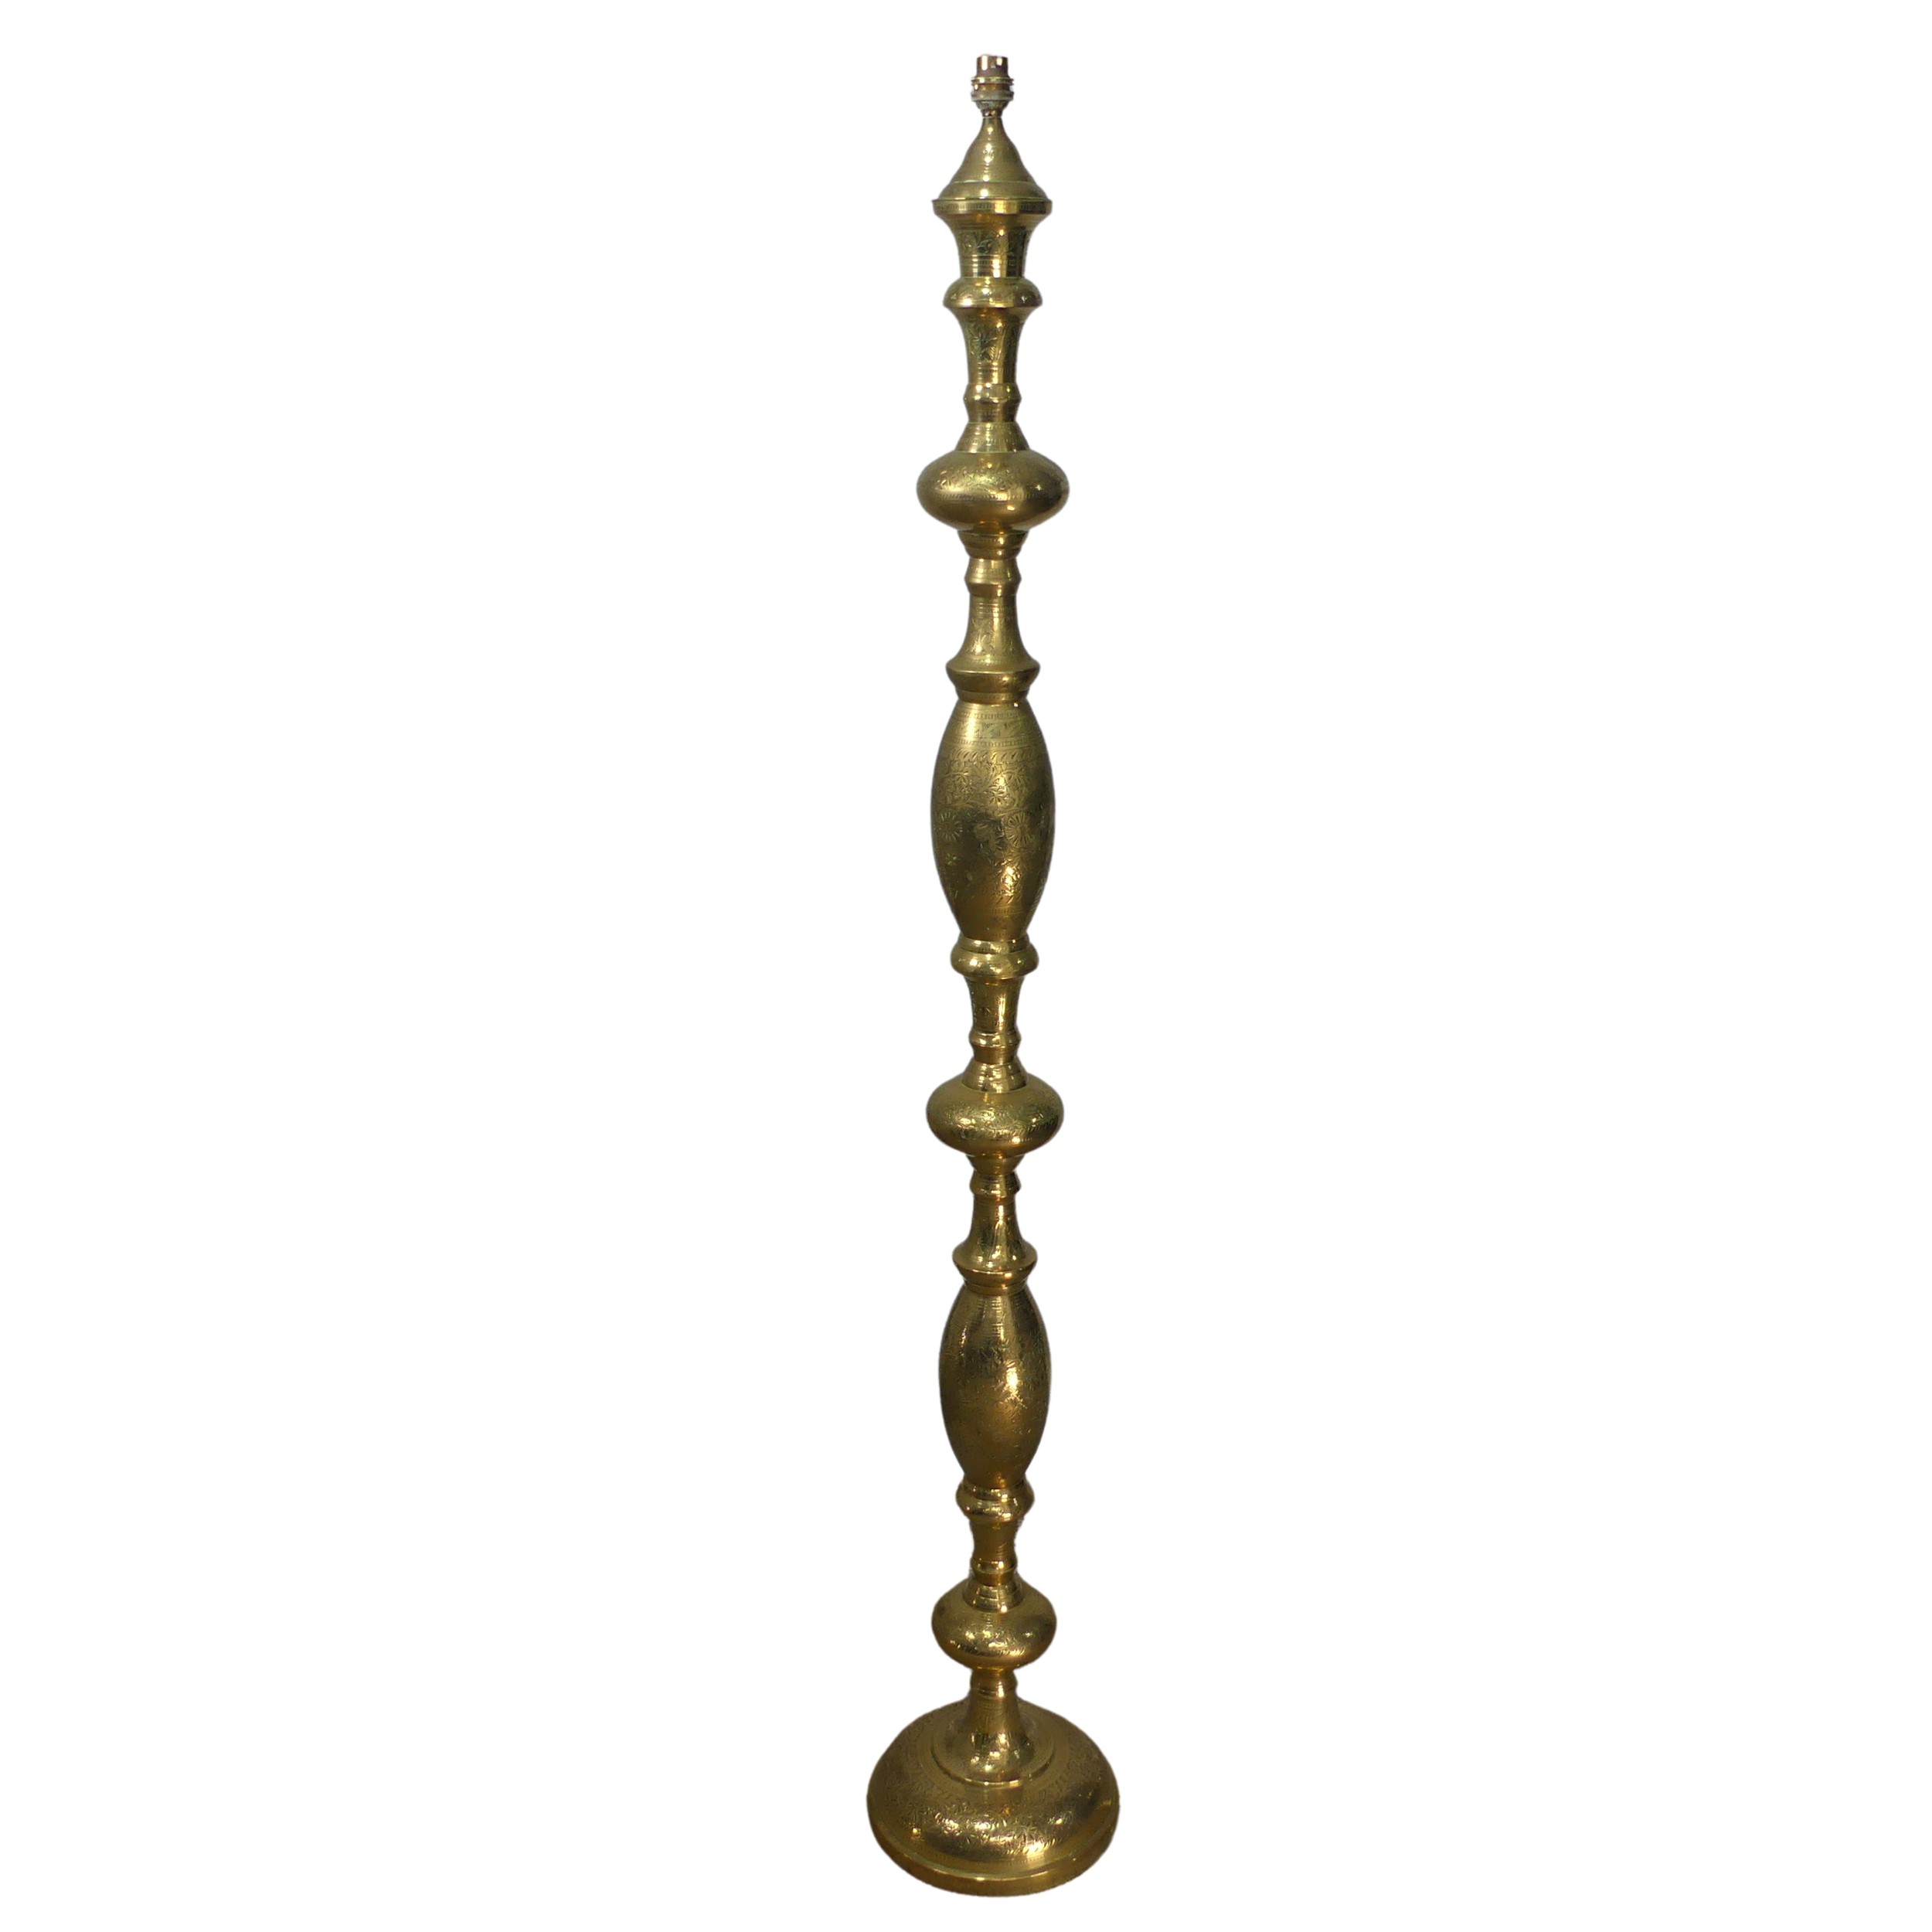 A heavily engraved brass standard Lamp, of baluster form, H 154 cm.